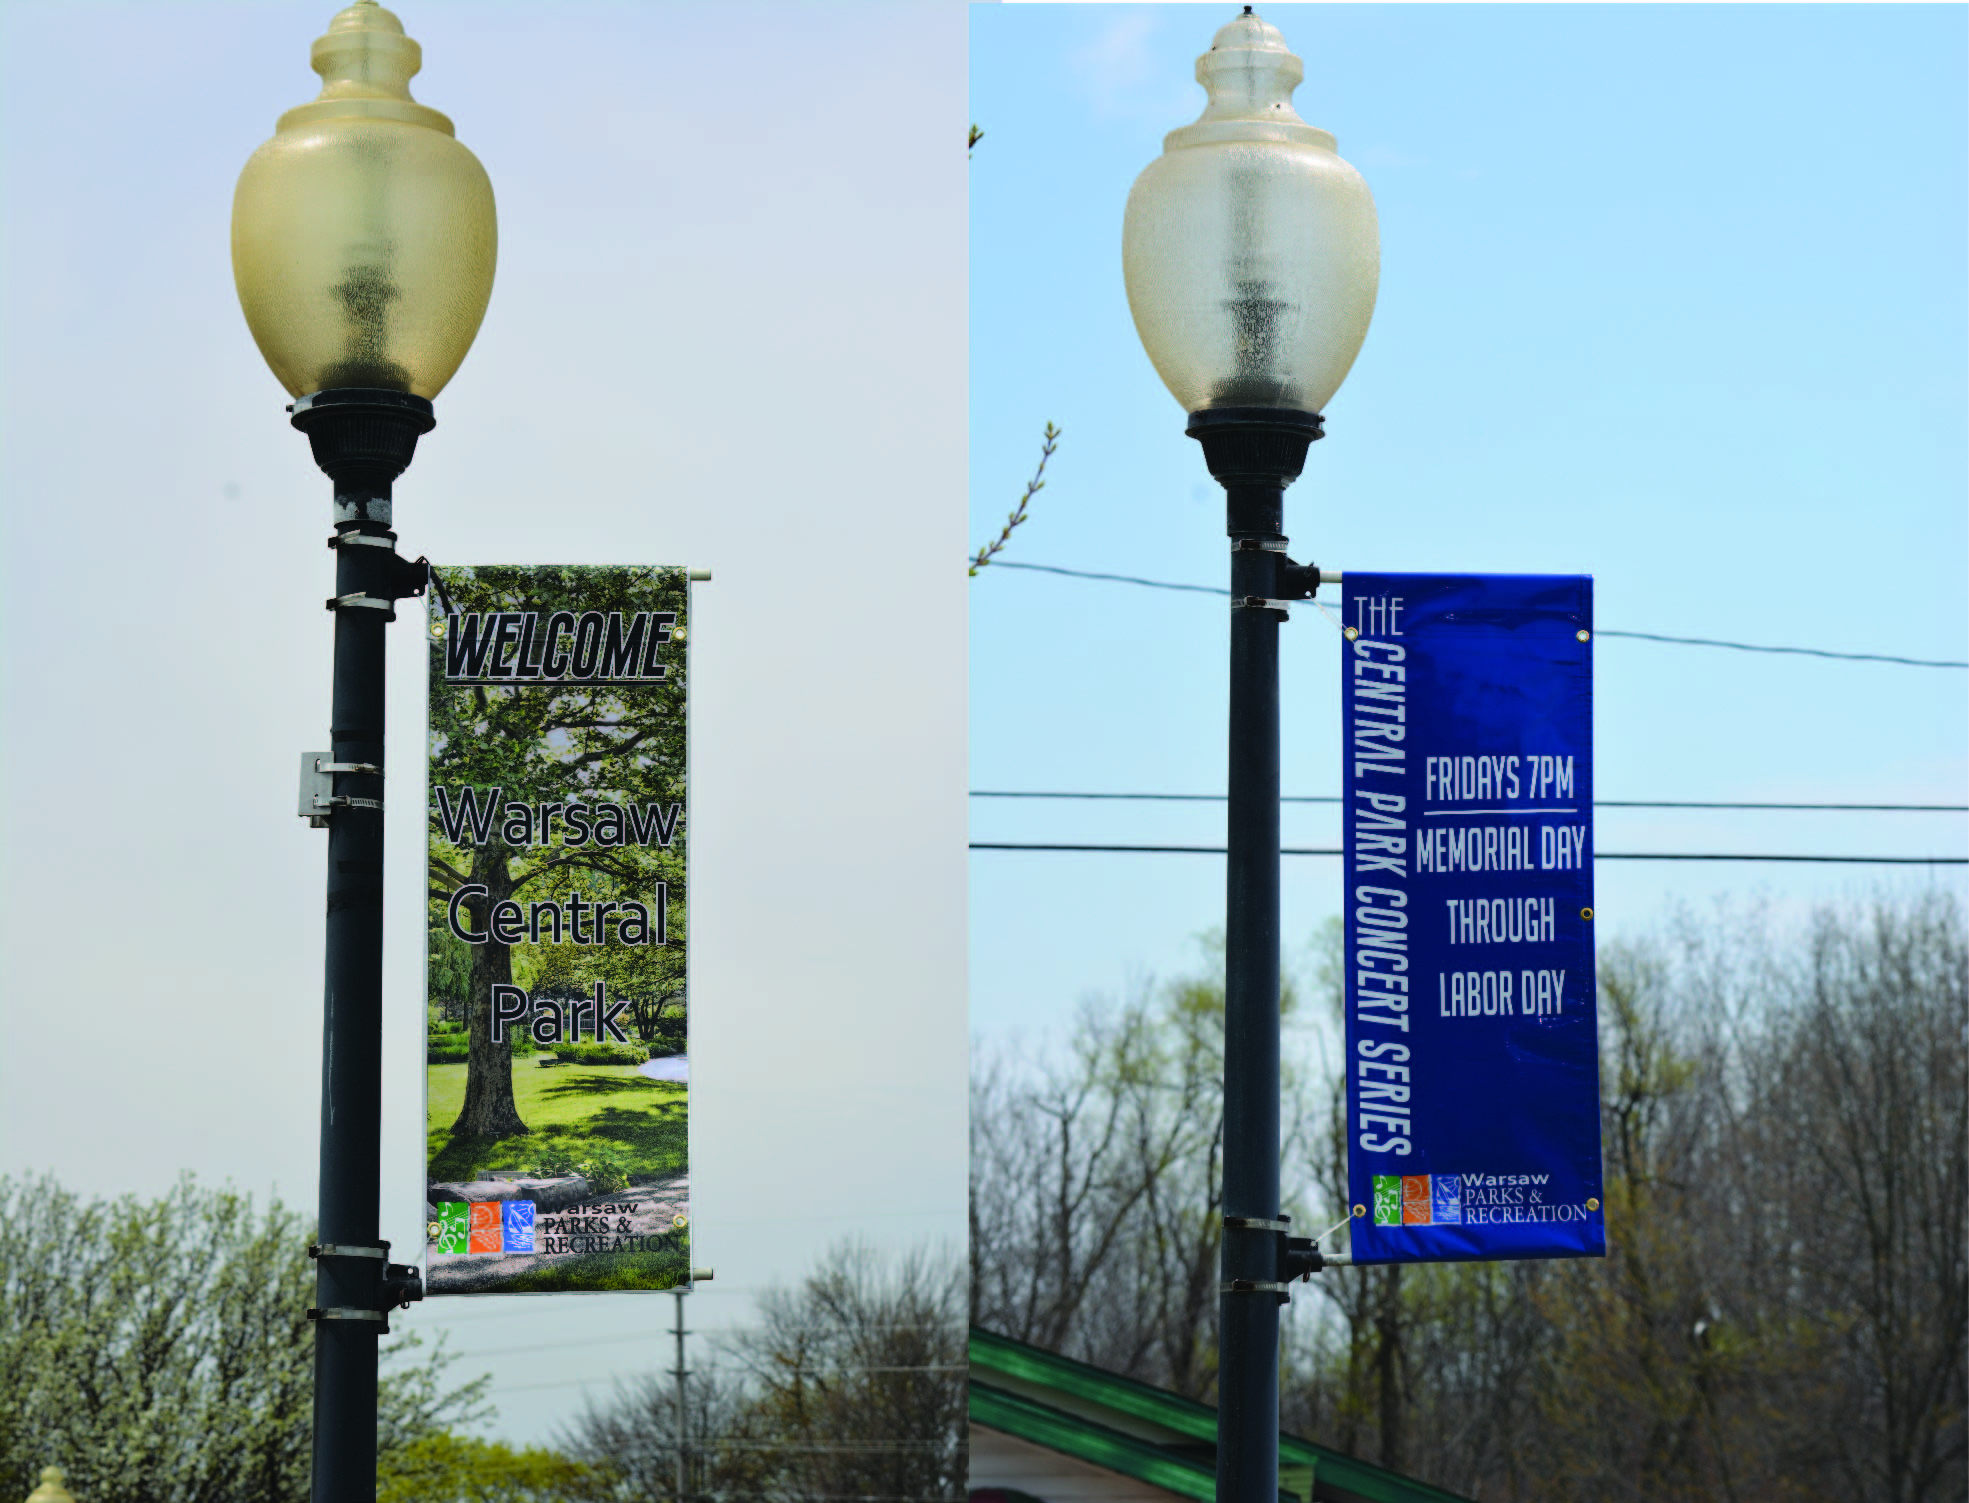 Warsaw Parks & Recreation Banners - Combined.jpg